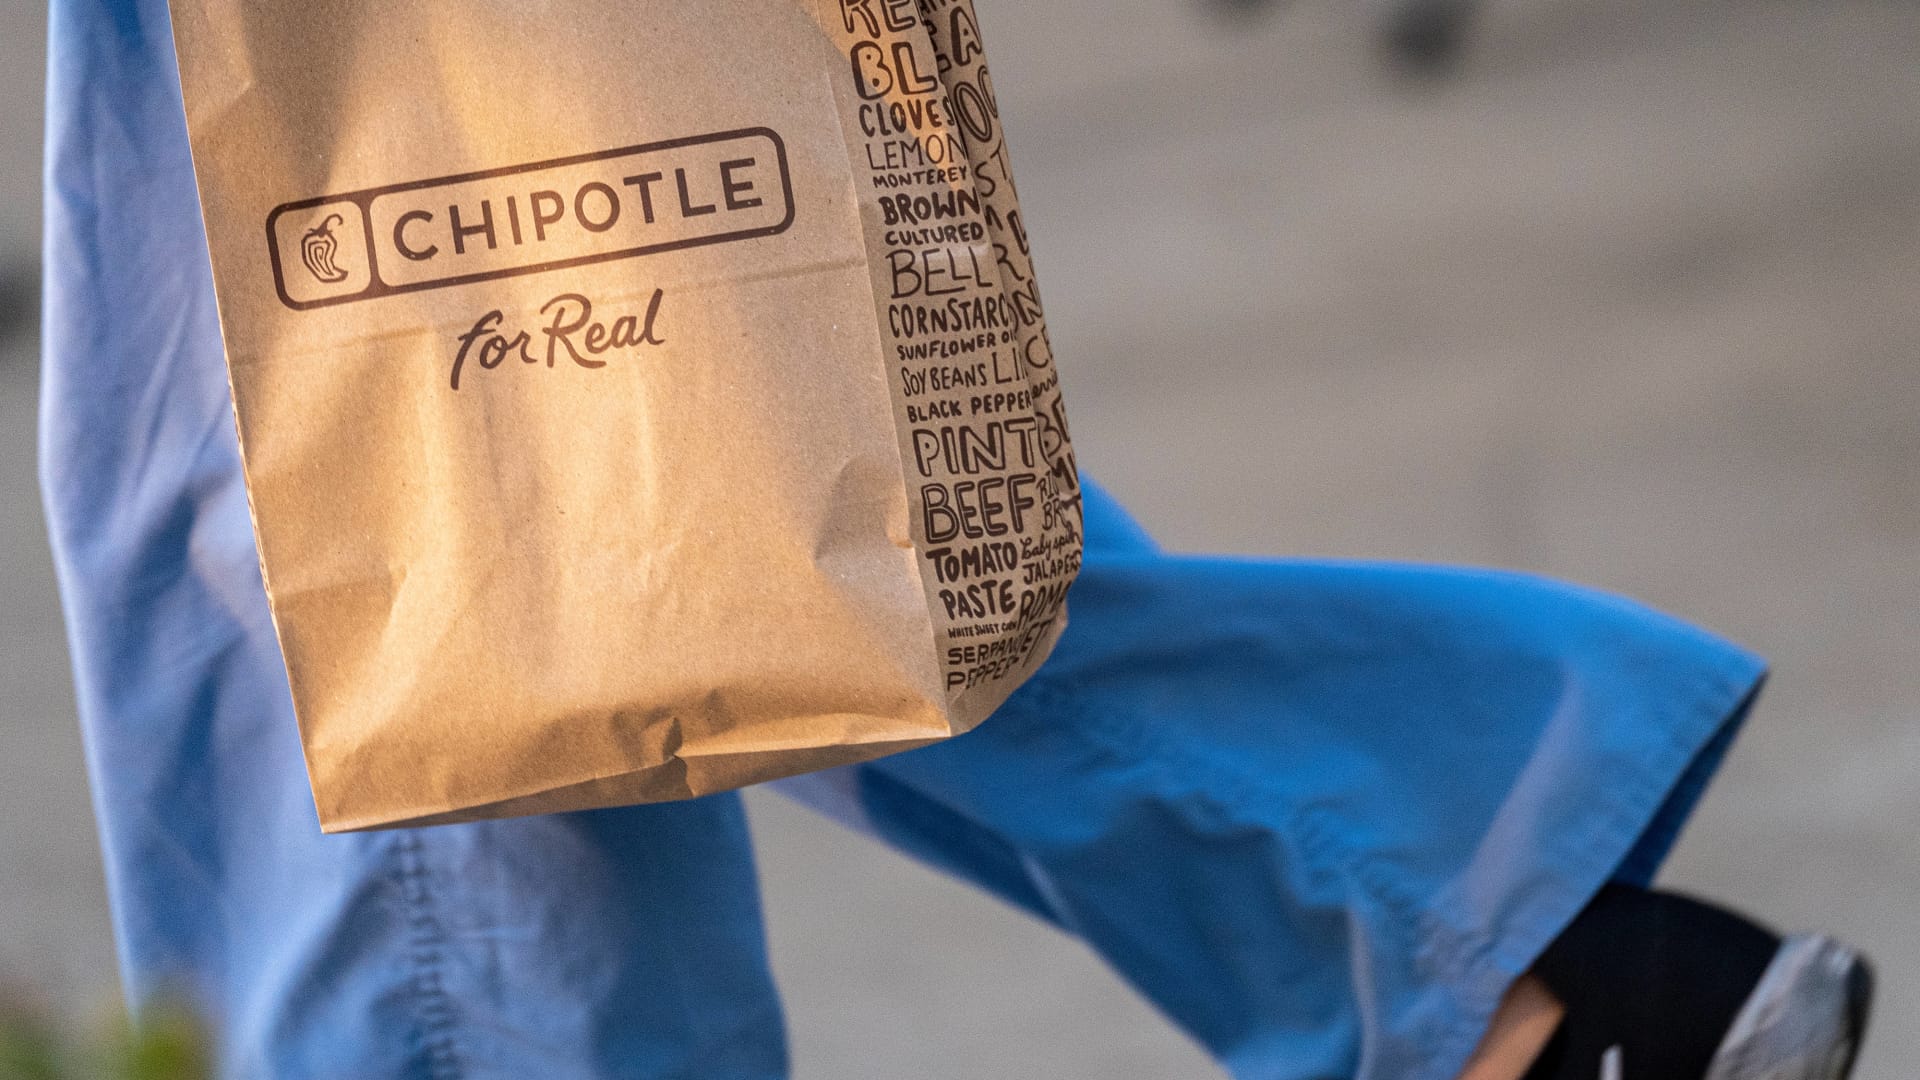 Chipotle restaurant in Maine files petition for union election